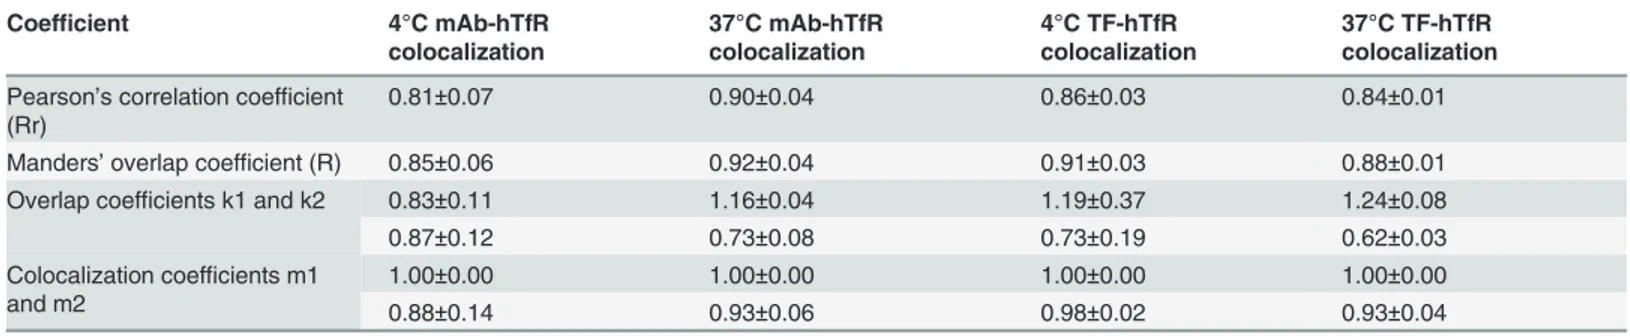 Table 1. Comparison of the results of coefficients calculations.